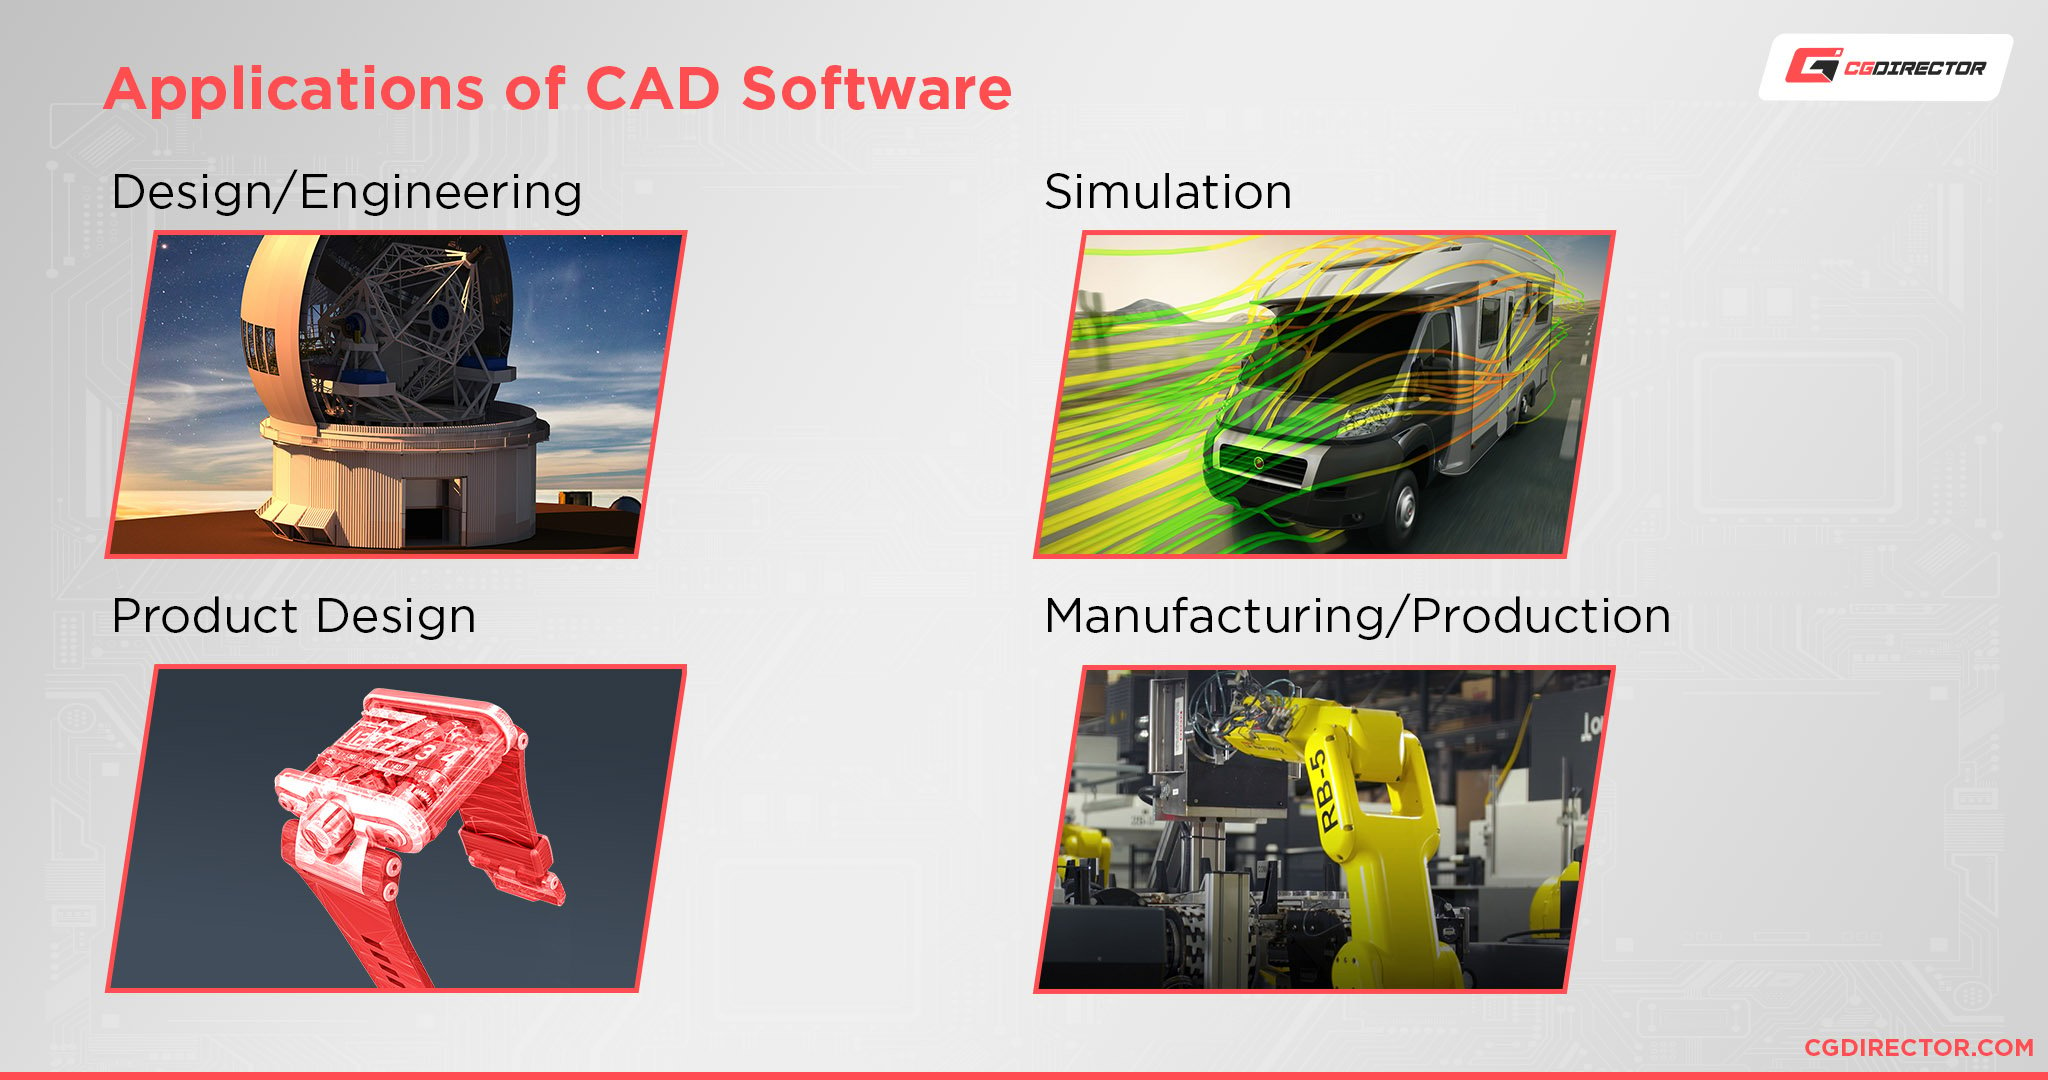 Applications of CAD Software